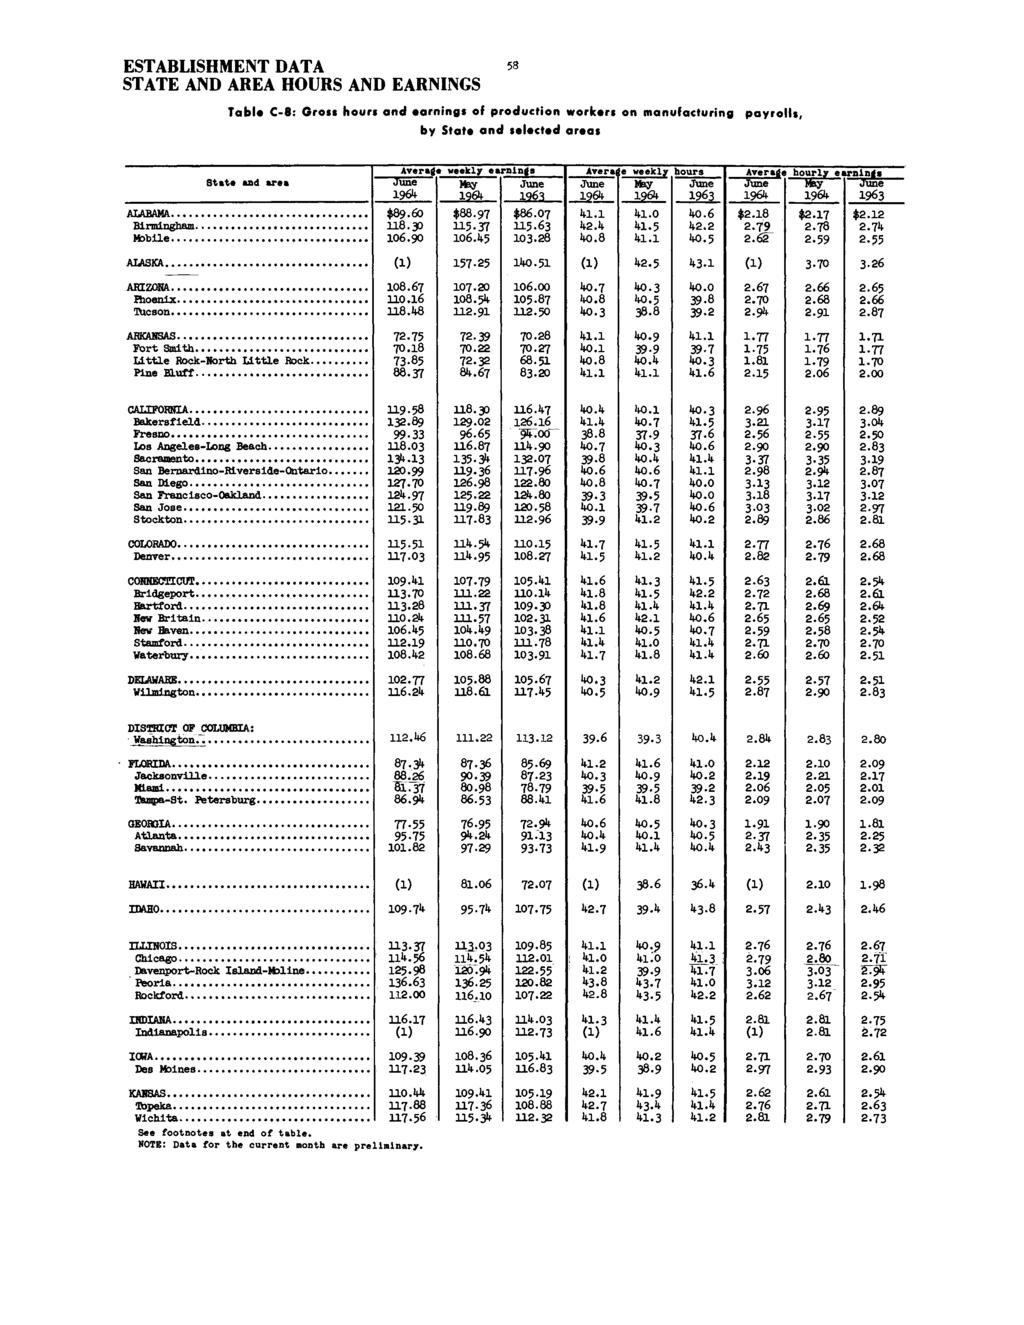 58 STATE AND AREA HOURS AND EARNINGS Table C-8: Gross hours and arnings of production workers on manufacturing by State and selected areas payrolls, ALABAMA Birmingham.